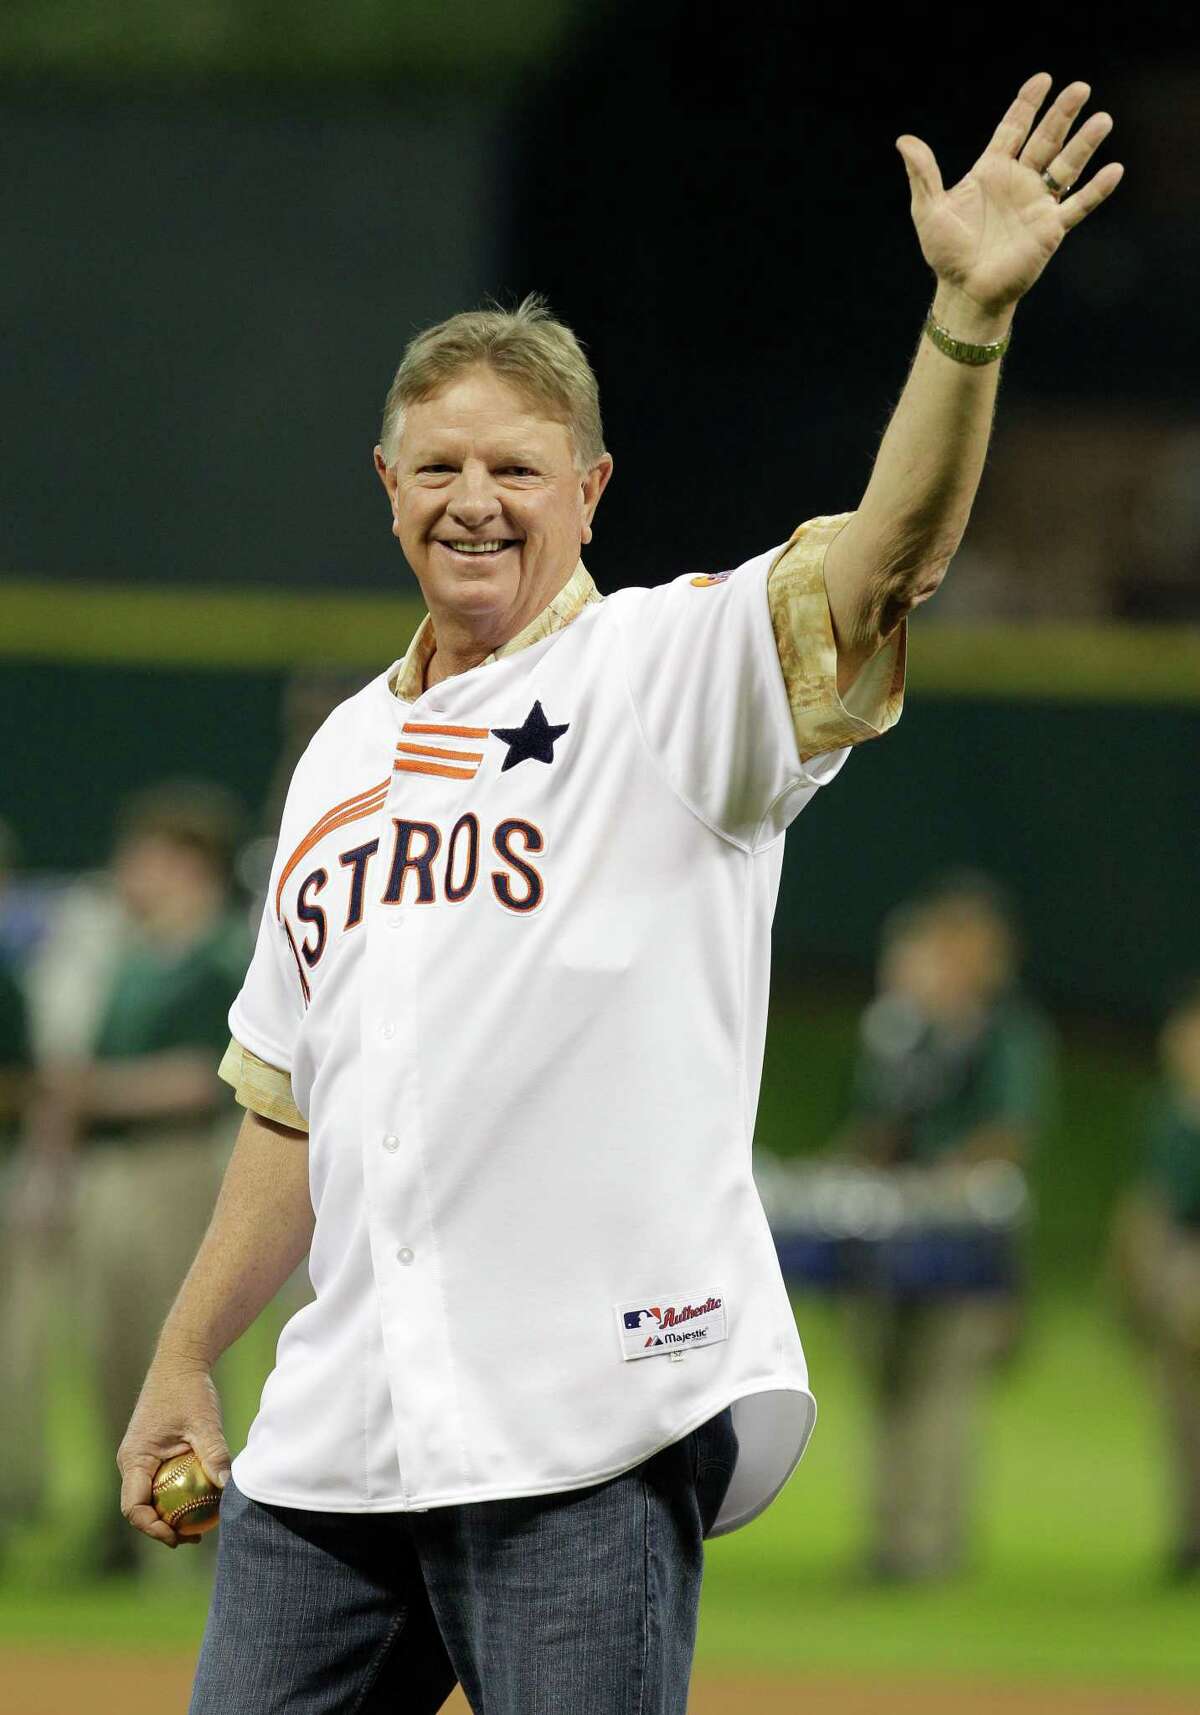 Former Houston Astros' Larry Dierker throws out a first pitch before game against the Los Angeles Dodgers Friday, April 20, 2012, in Houston. He used a ceremonial 24-karat gold leather cover baseball. ( Melissa Phillip / Houston Chronicle )